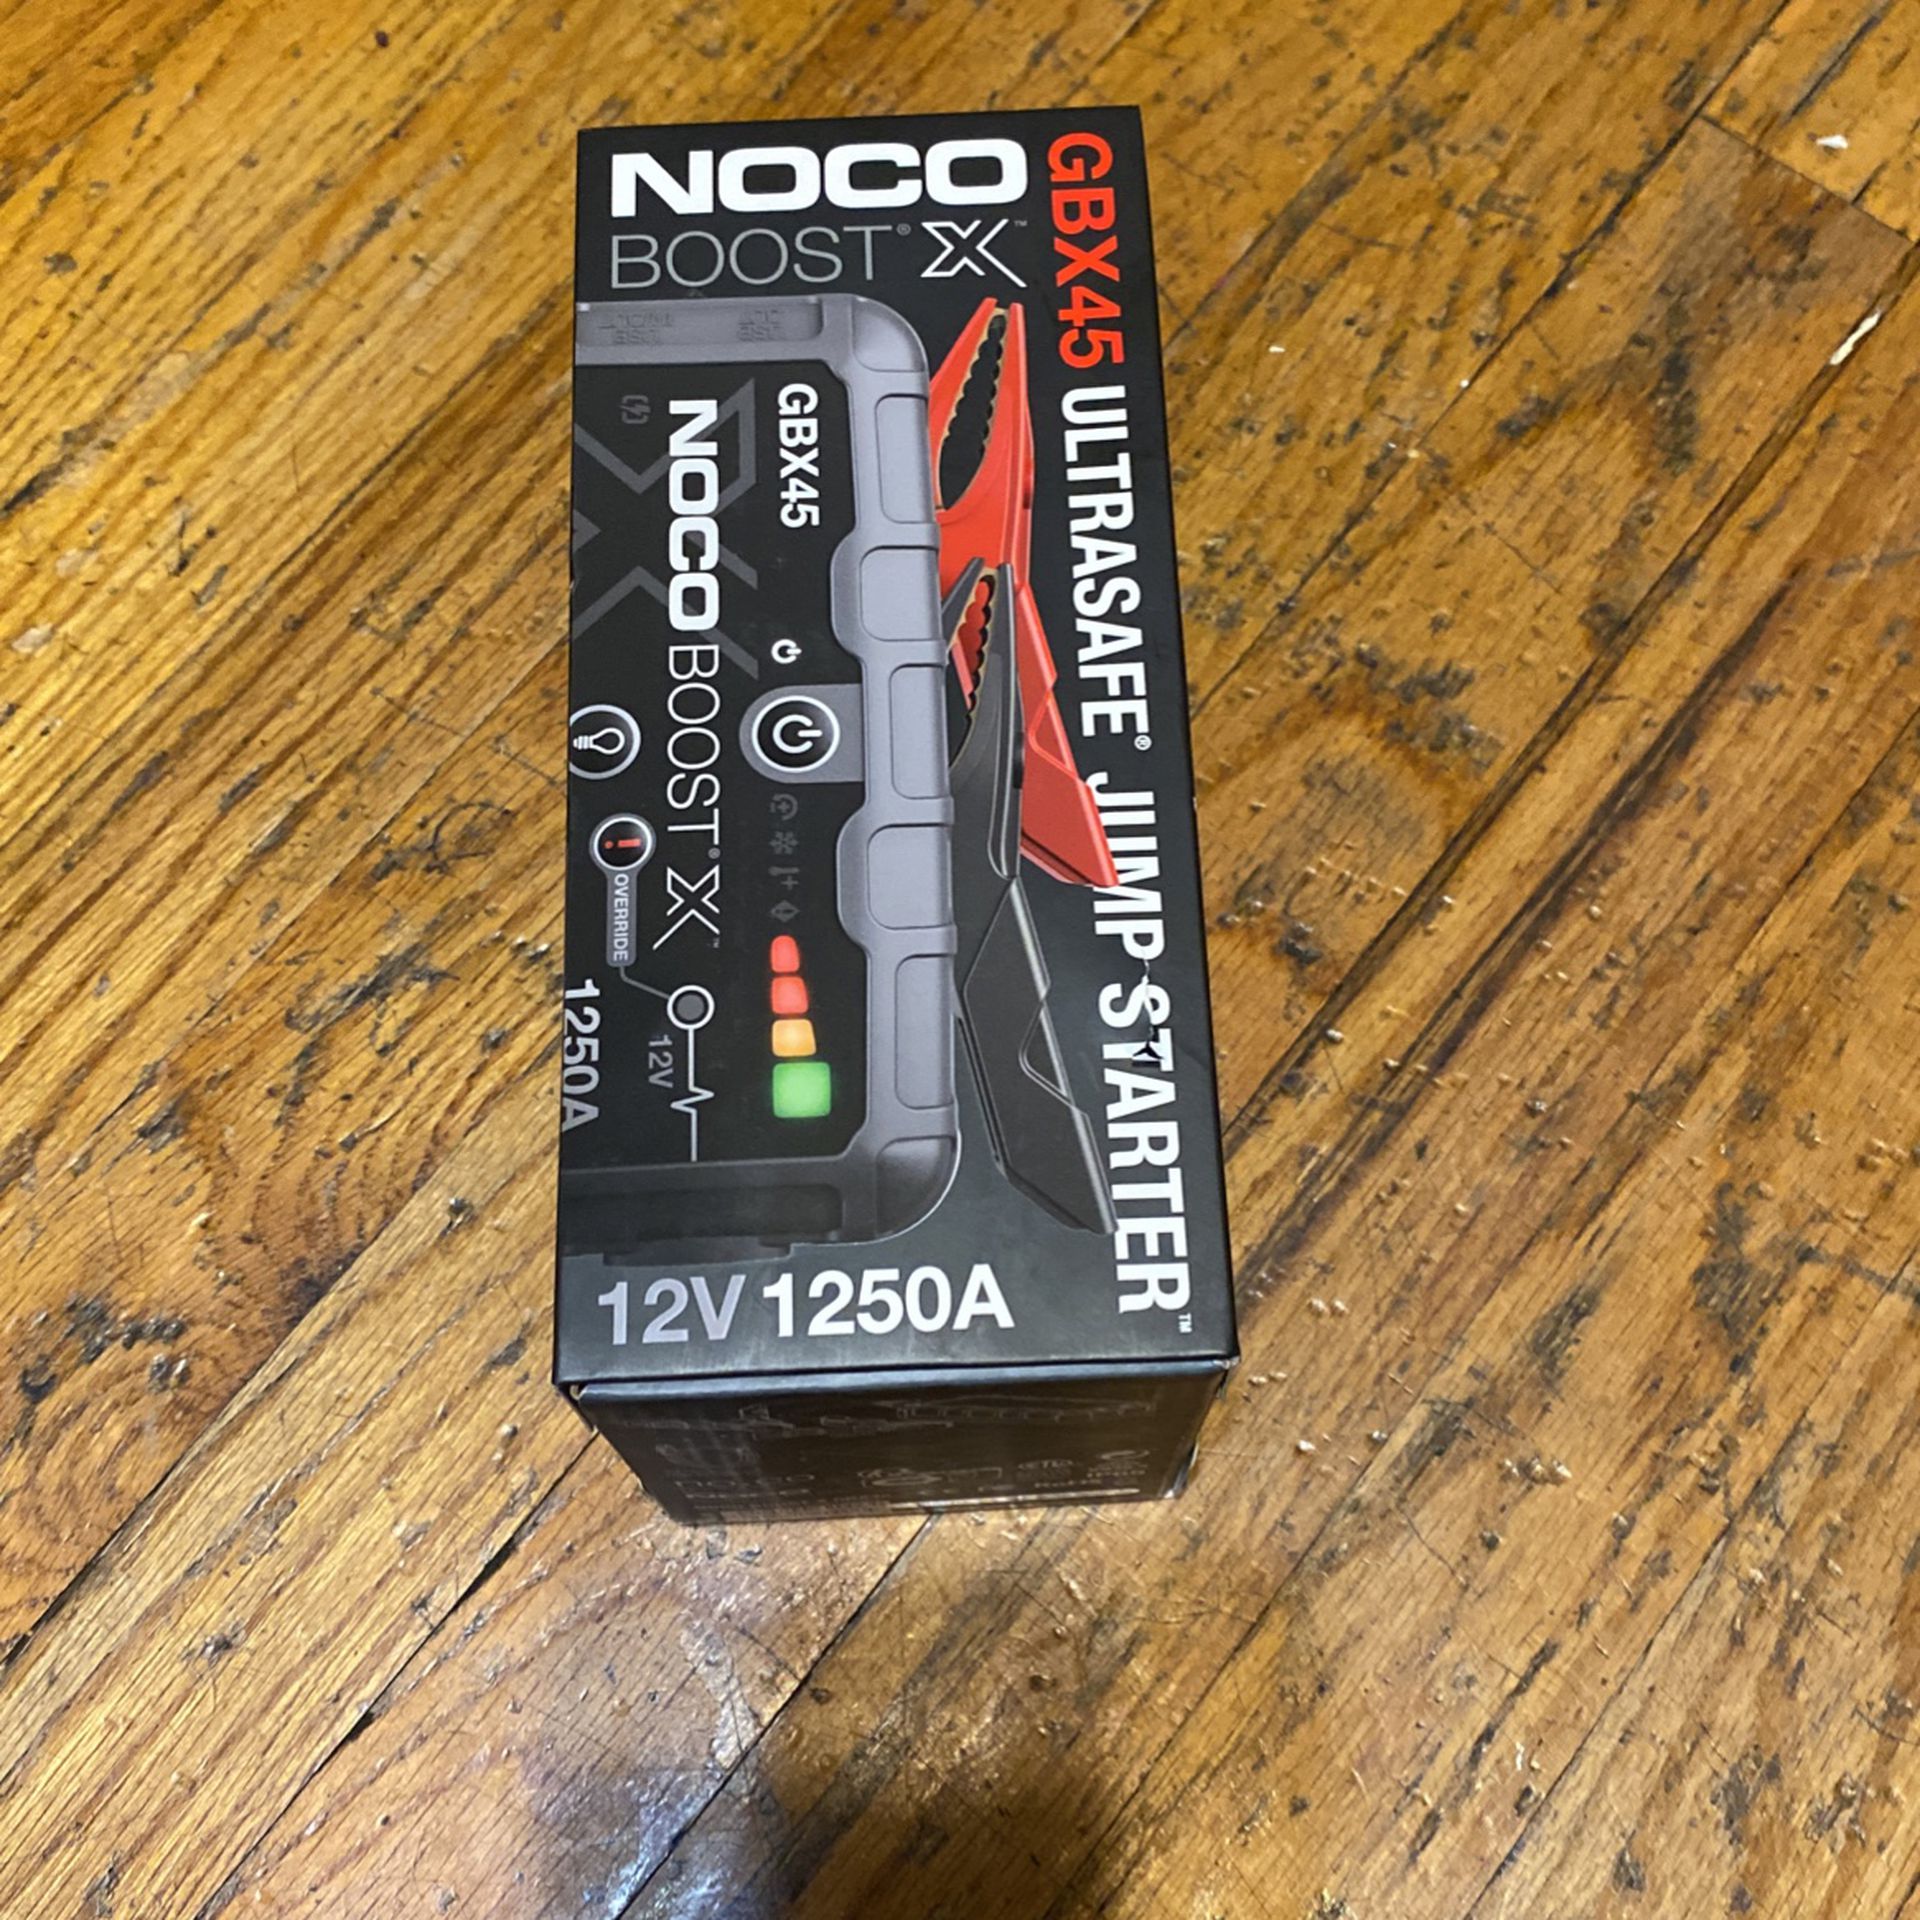 NOCO Boost X GBX45 1250A 12V Booster Batterie Vo…